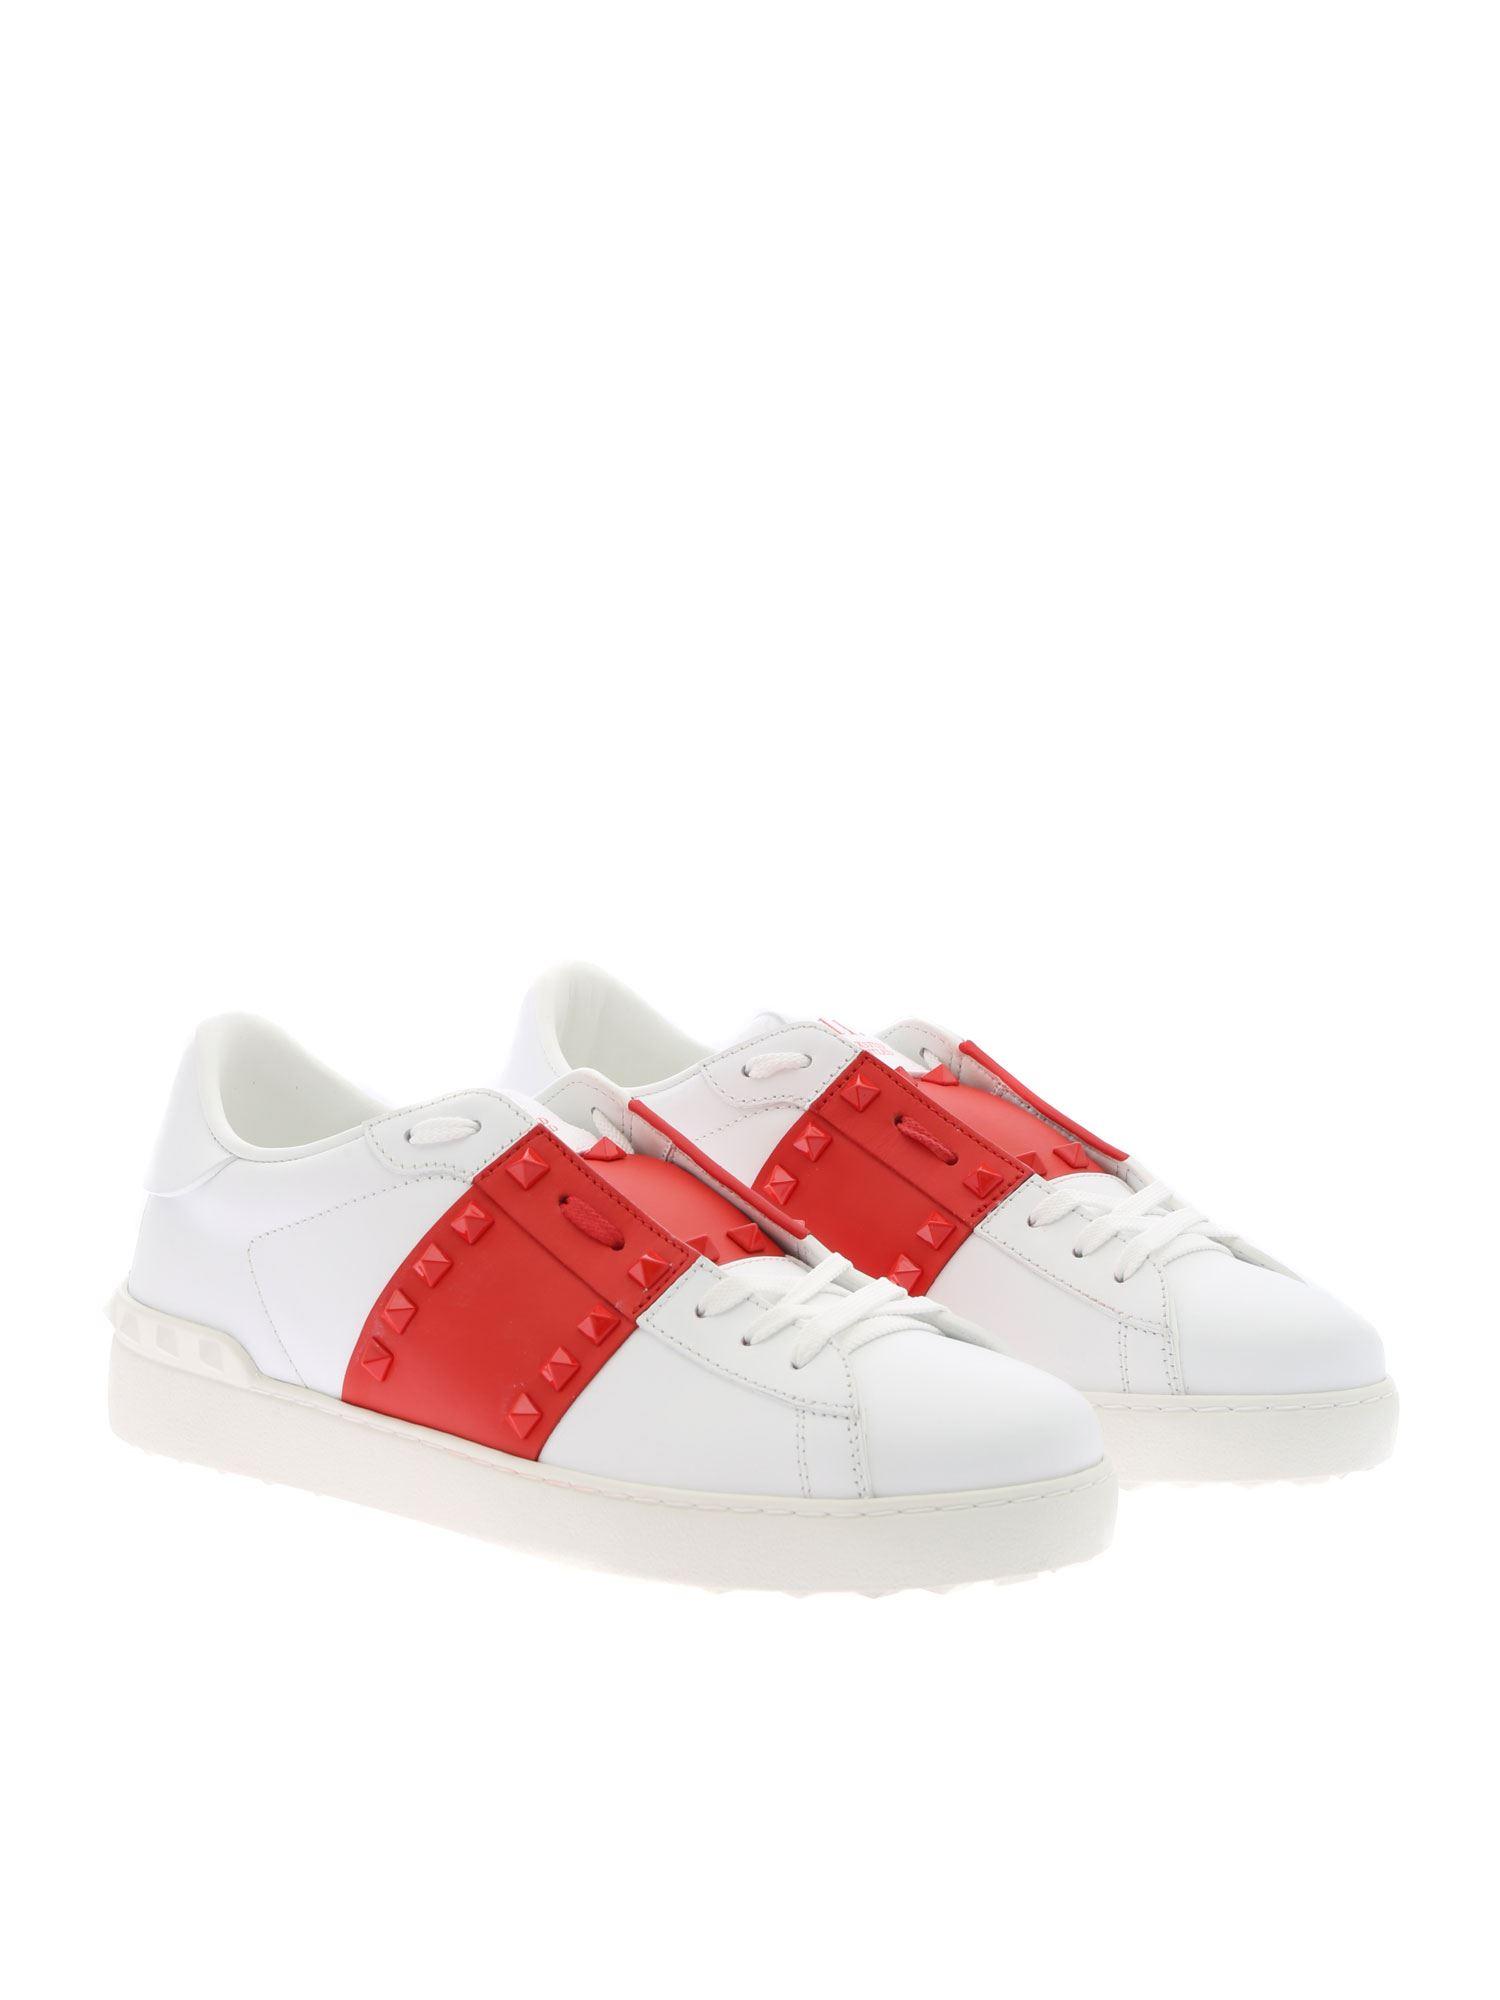 Valentino White And Sneakers Sale, 45% - motorhomevoyager.co. uk